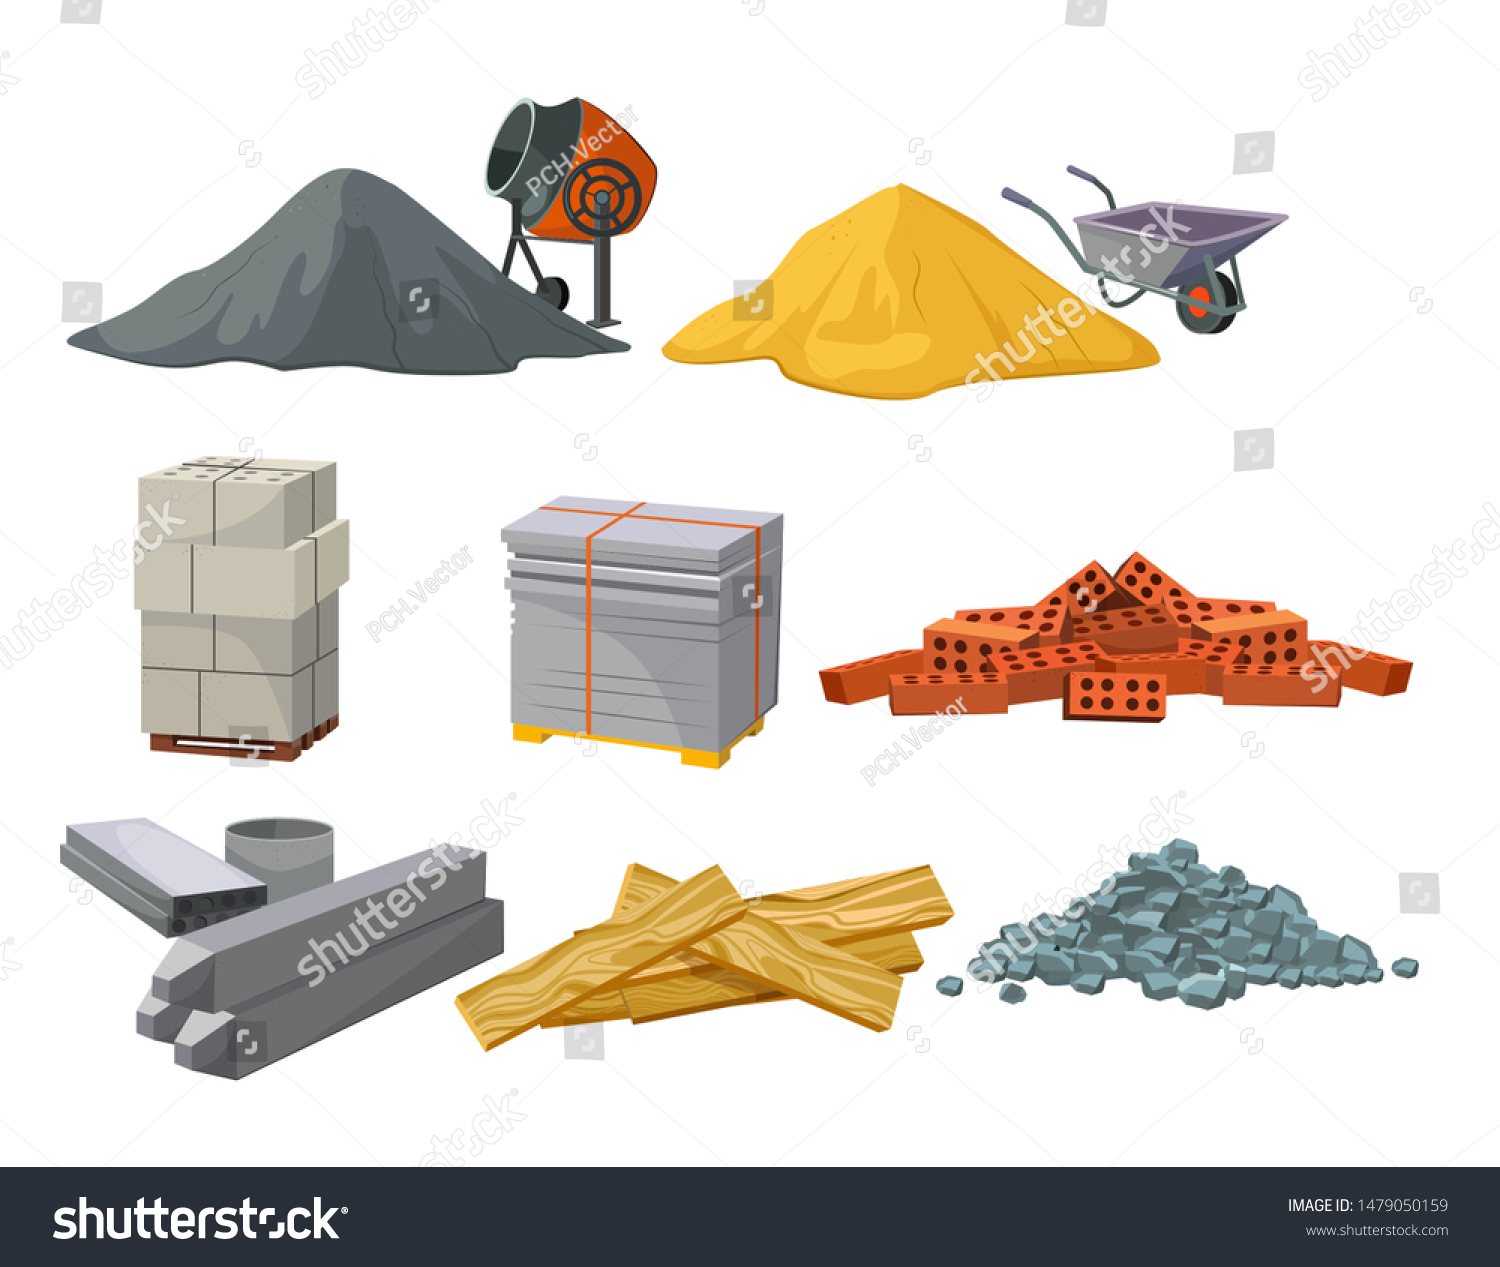 Building material heaps set. Bricks, sand, wooden planks, concrete mixer. Construction concept. Vector illustrations can be used for construction sites, works, industry #1479050159